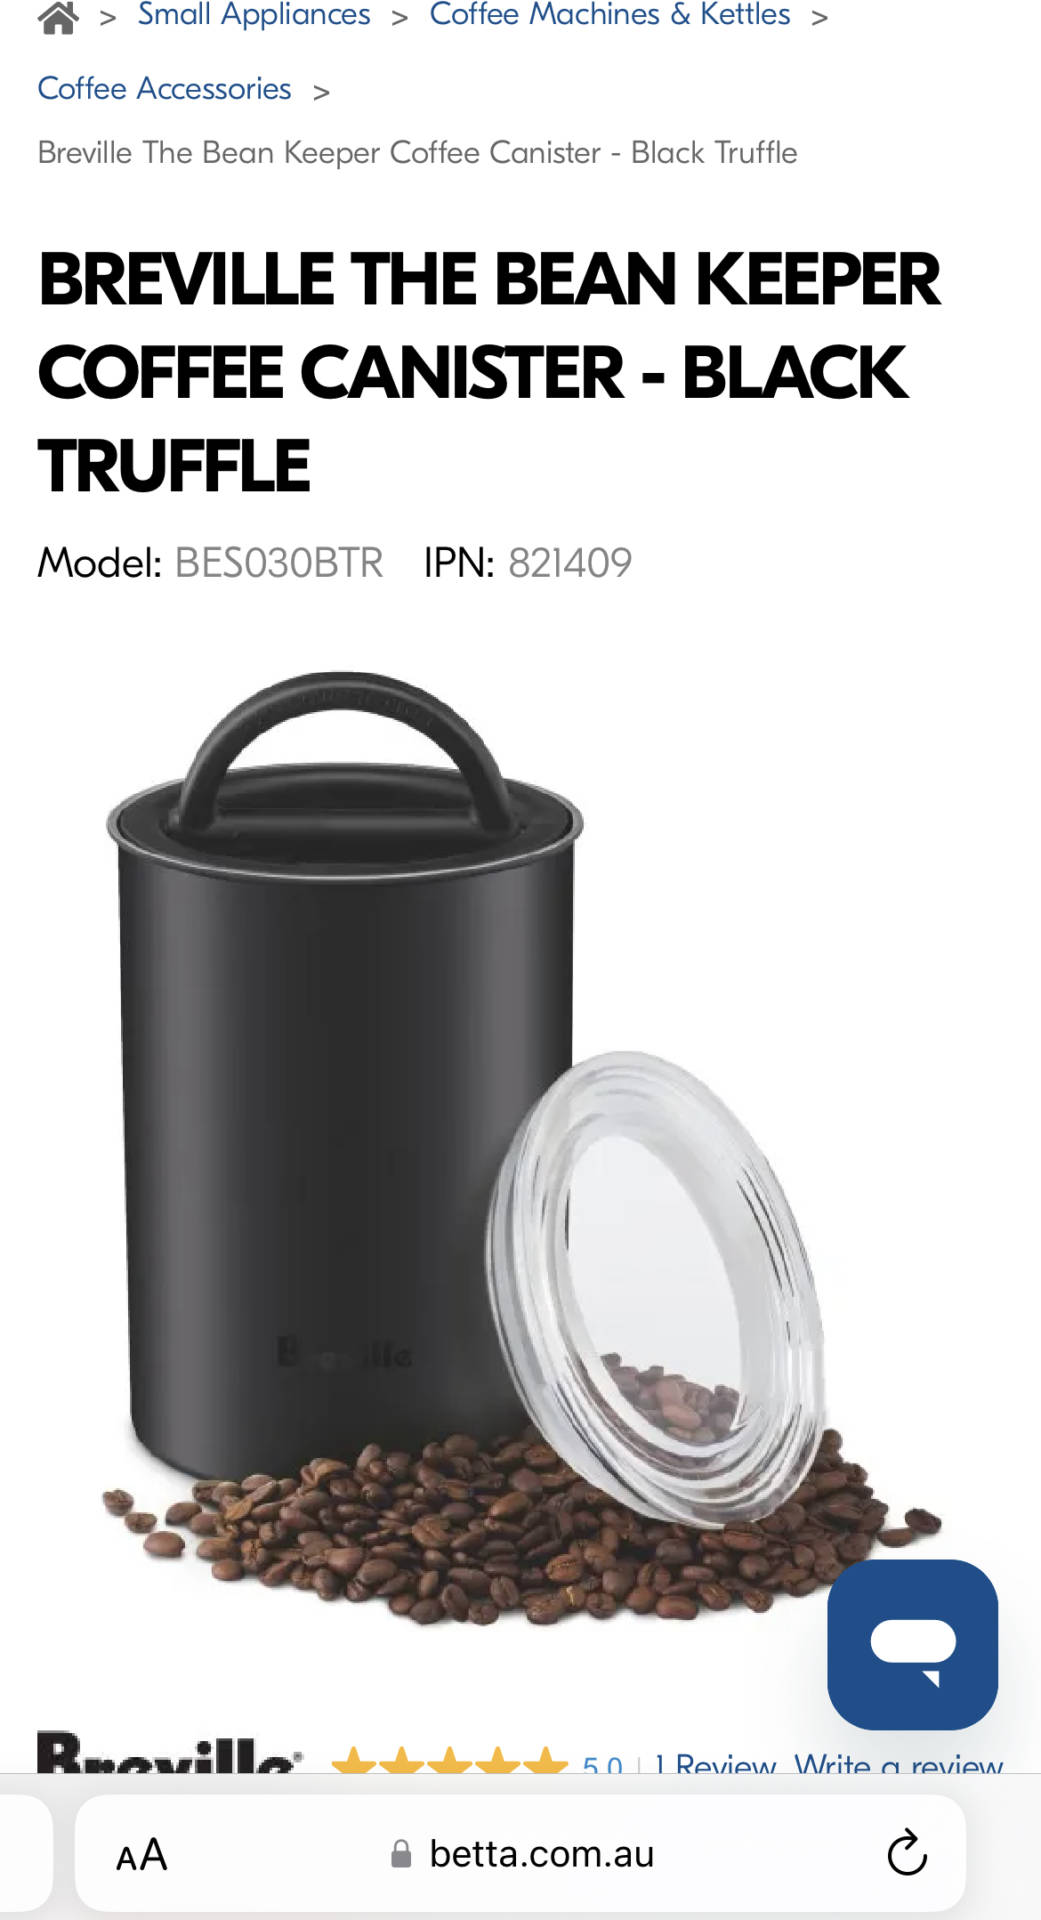 Breville the Bean Keeper Canister